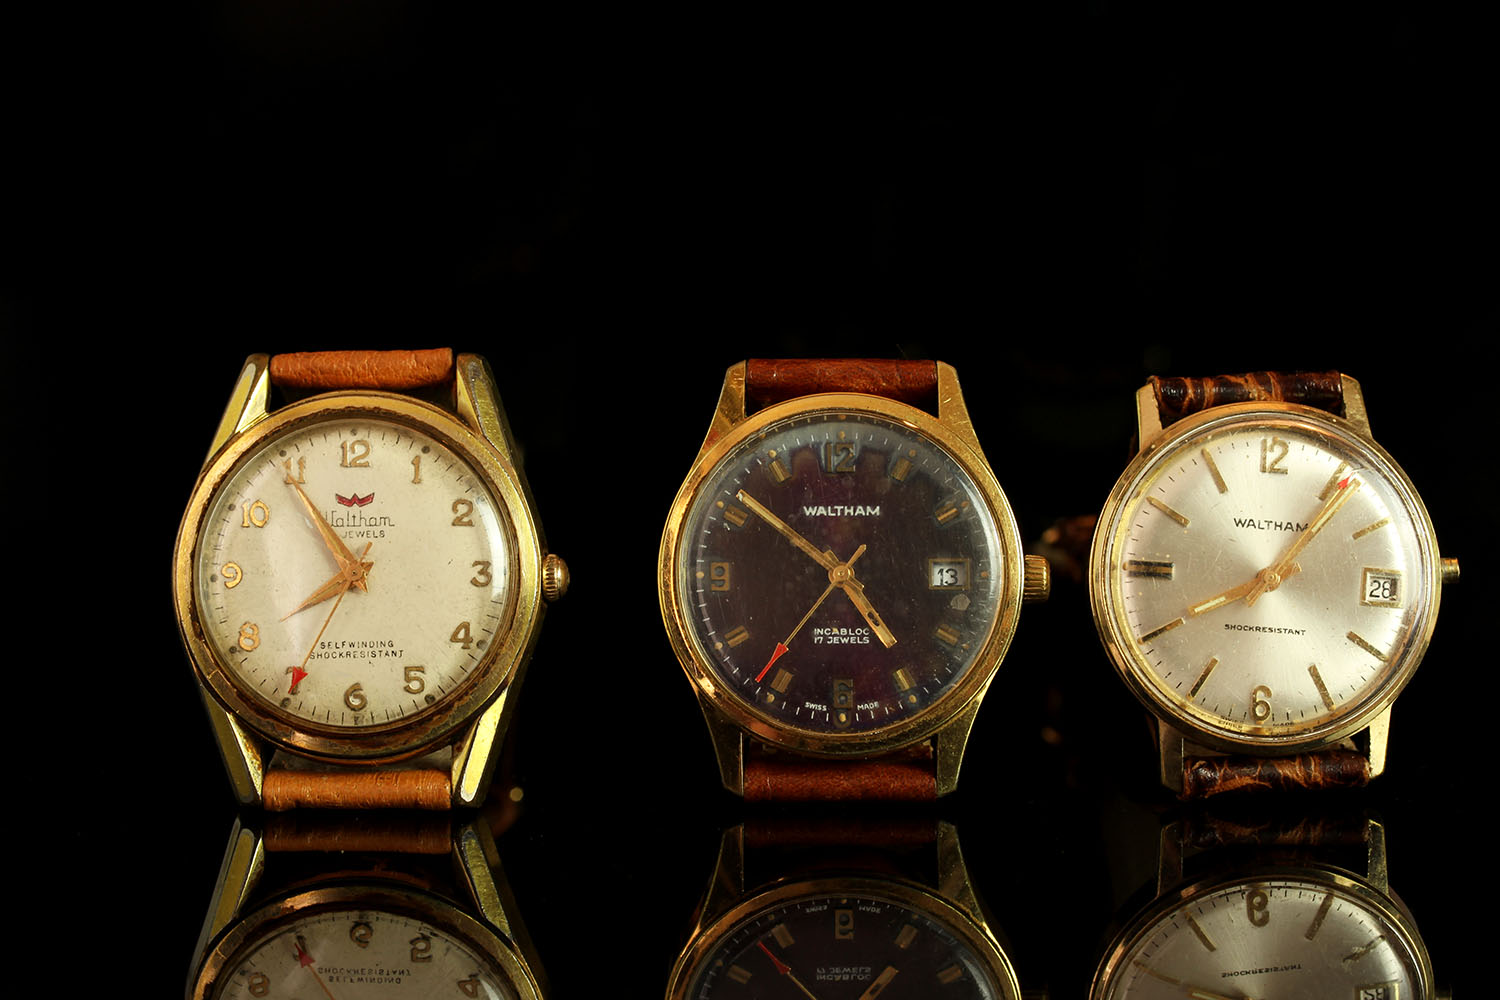 GROUP OF 3 WALTHAM WATCHES, all three watches are gold plated, one missing a crown, case sizes range